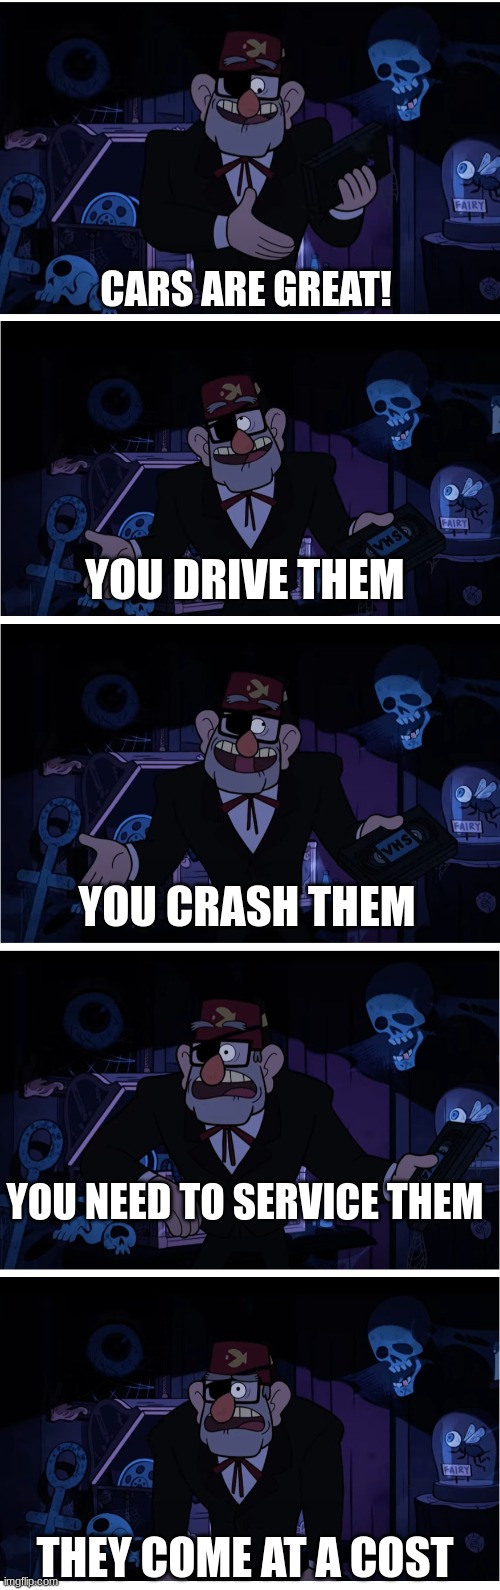 A dealer be like... | CARS ARE GREAT! YOU DRIVE THEM; YOU CRASH THEM; YOU NEED TO SERVICE THEM; THEY COME AT A COST | image tagged in grunkle stan describes | made w/ Imgflip meme maker